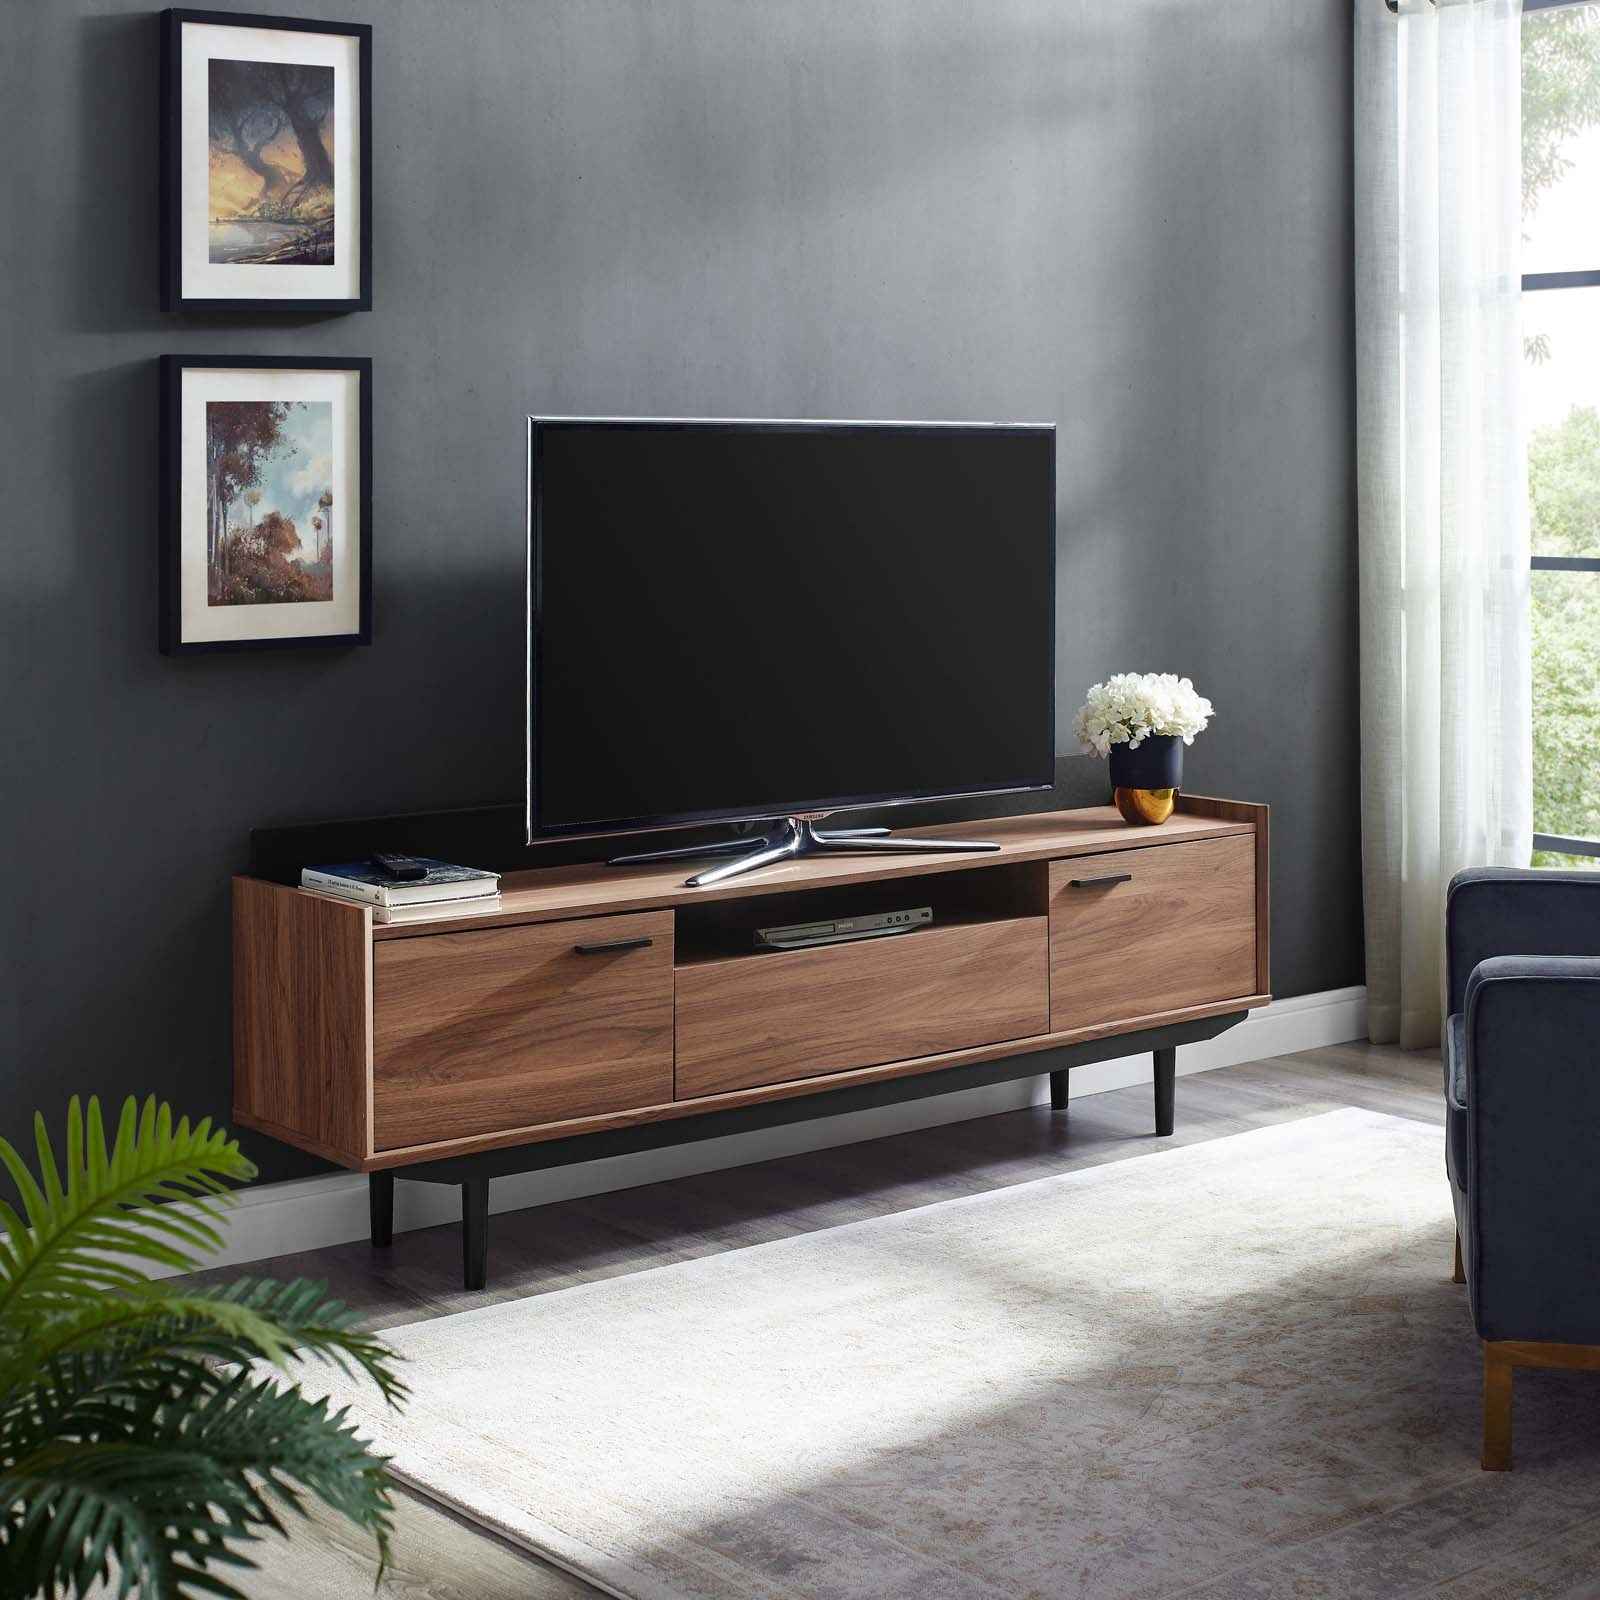 Visionary 71" TV Stand - East Shore Modern Home Furnishings